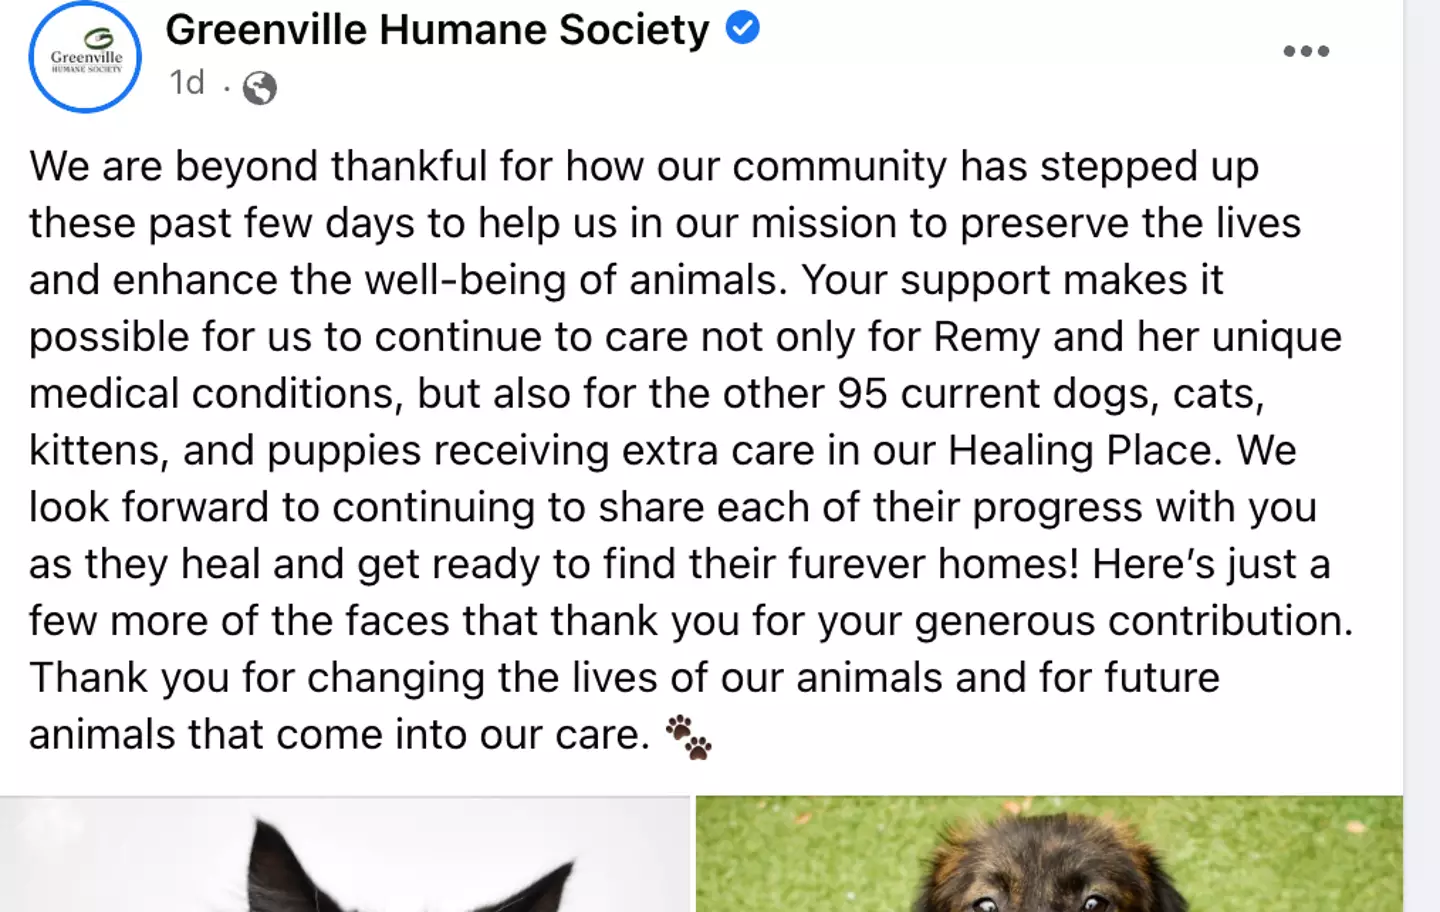 The shelter was inundated with donations after posting about Remy.